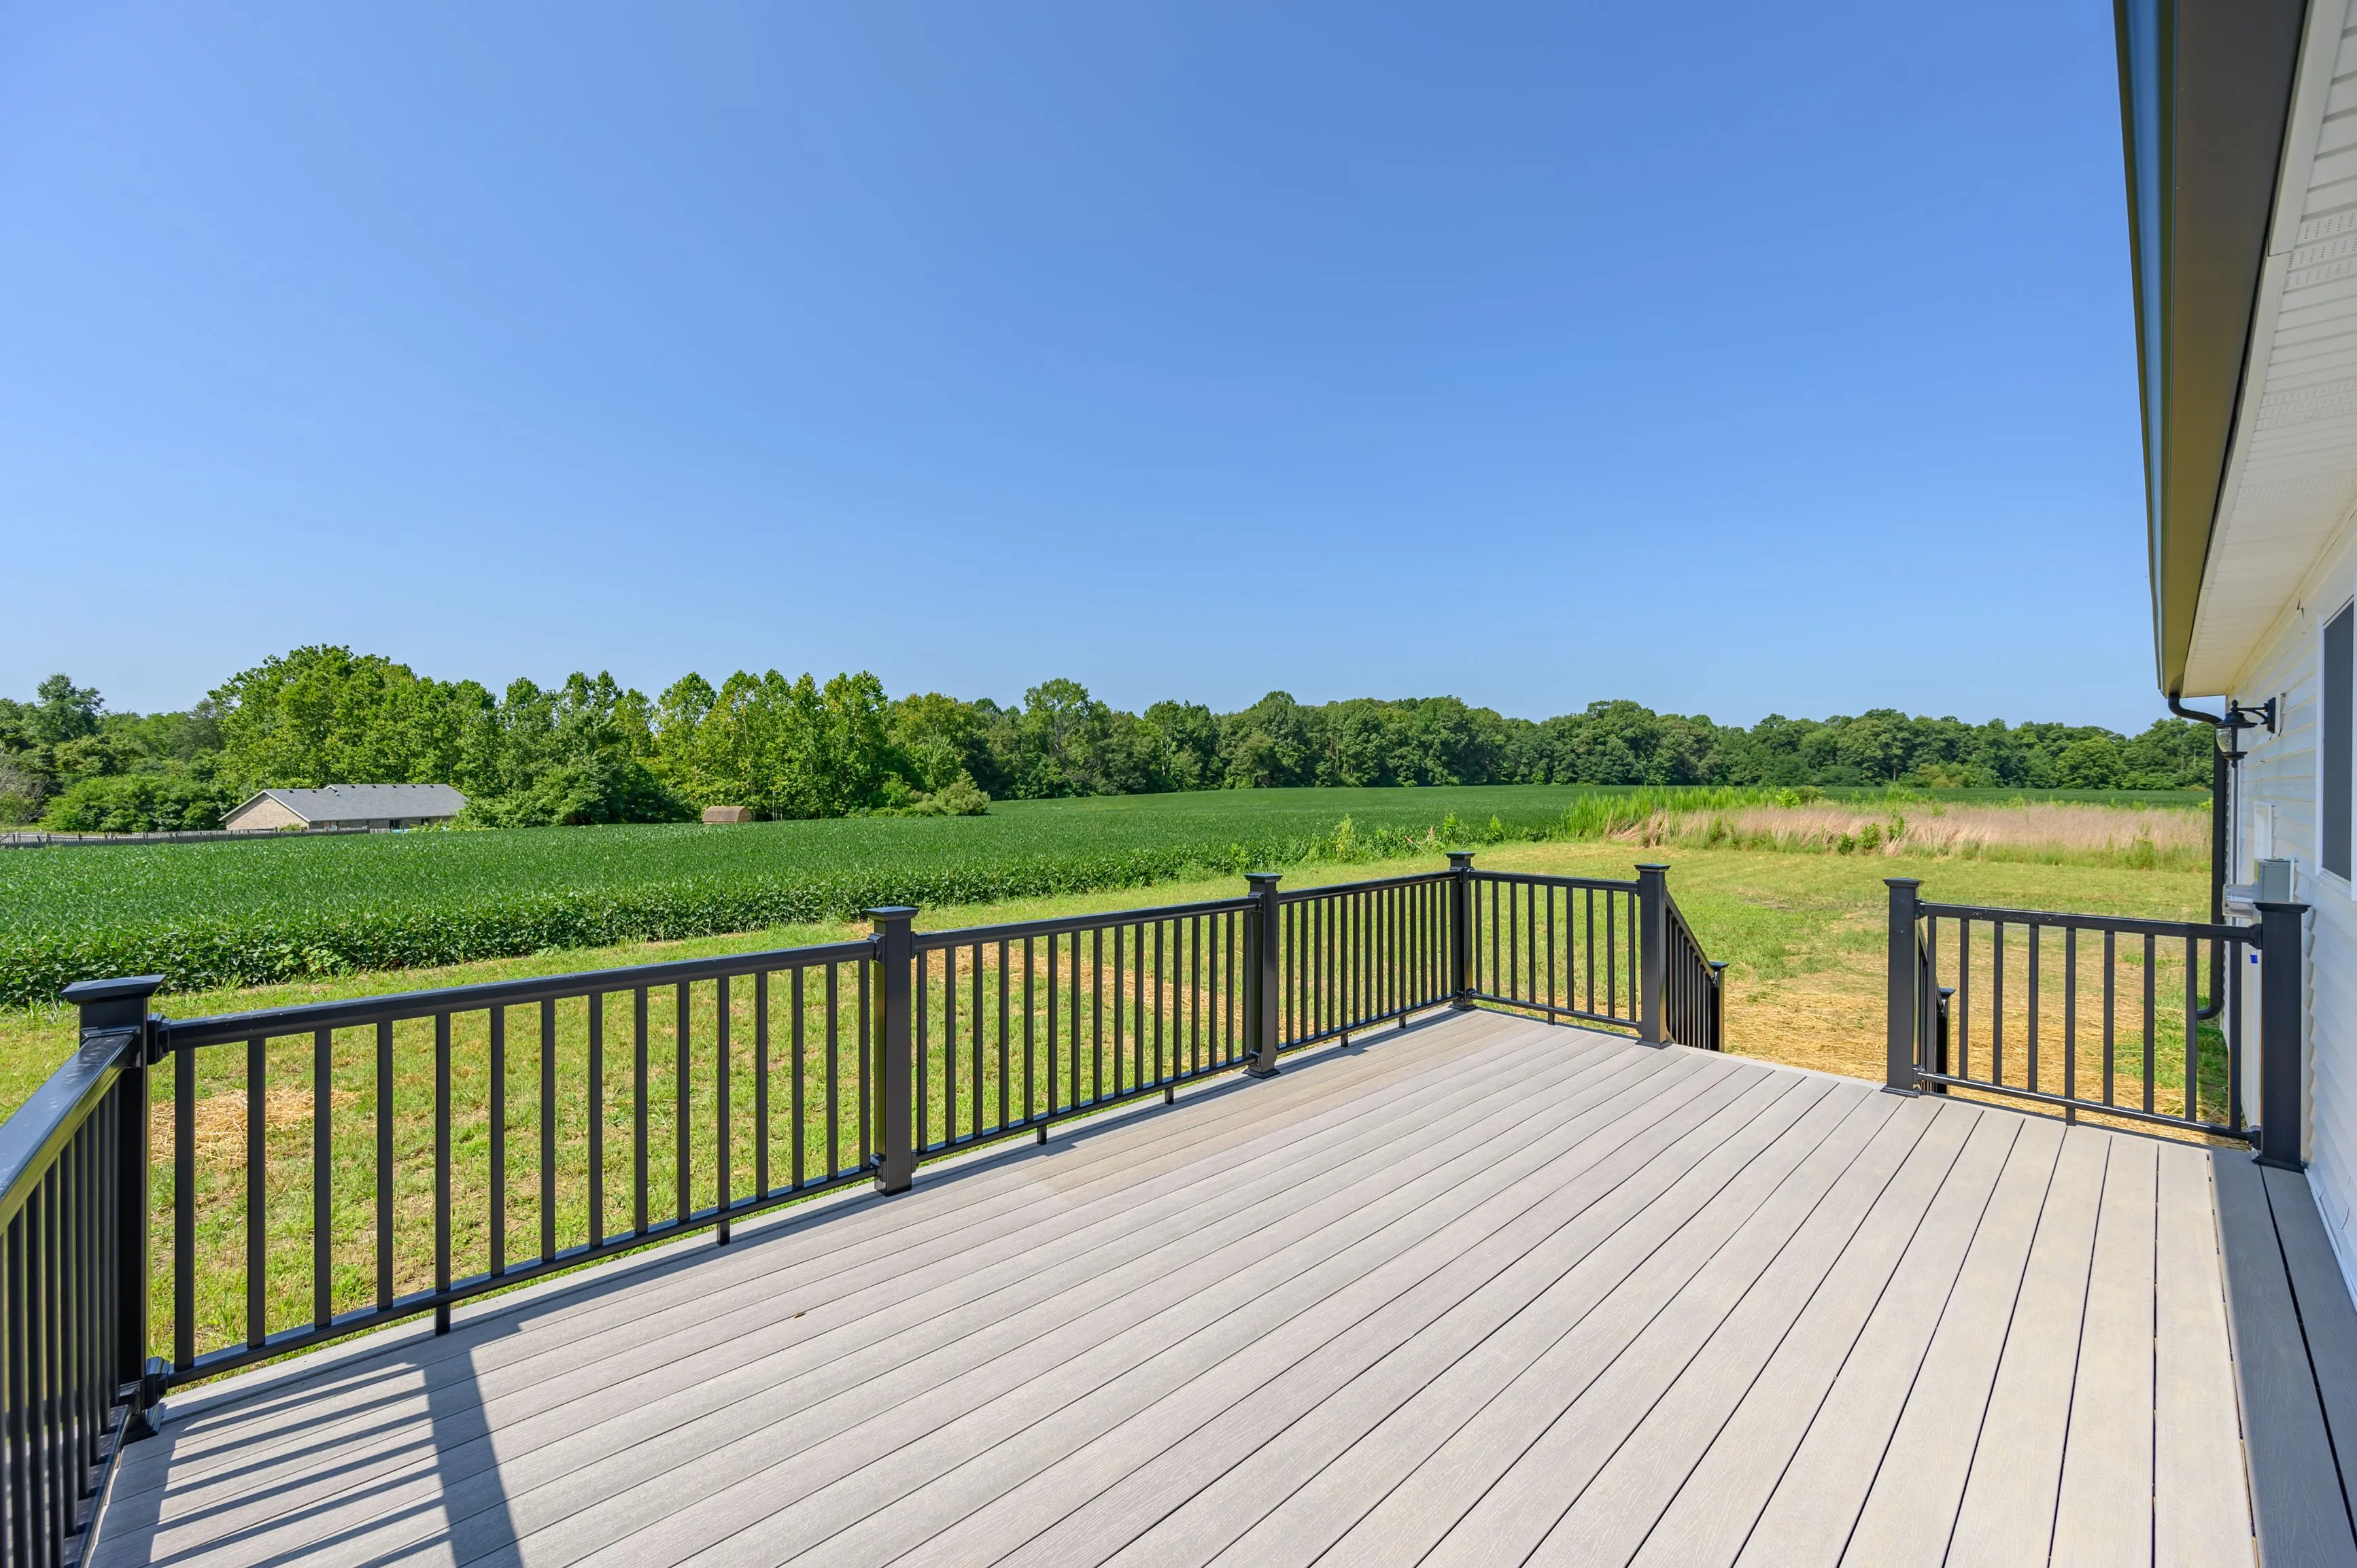 Spacious deck with railing overlooking a lush green field and trees under a clear blue sky.